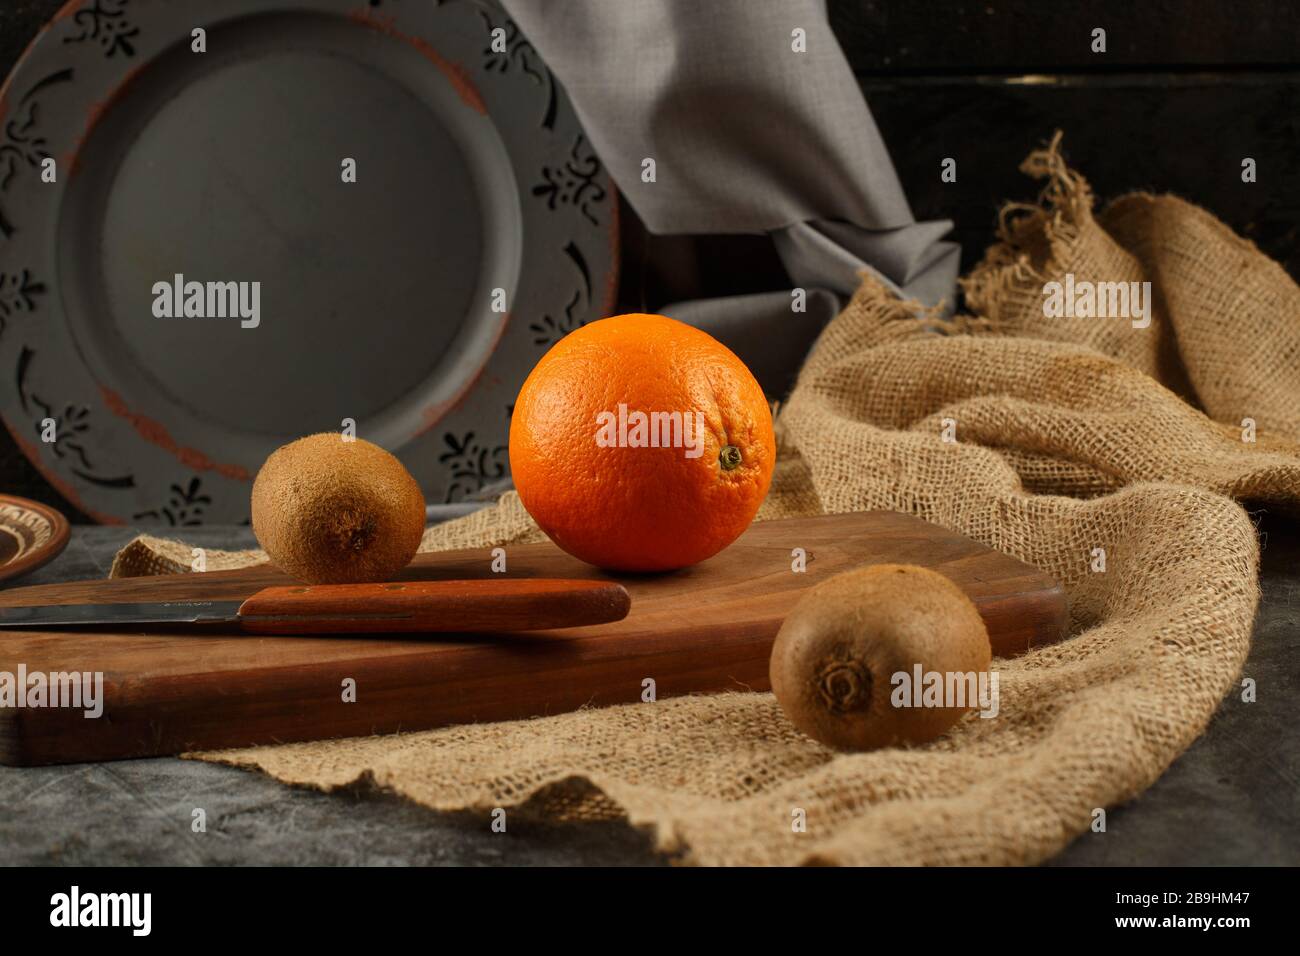 Orange and kiwies on a wooden board with a knife around. Stock Photo